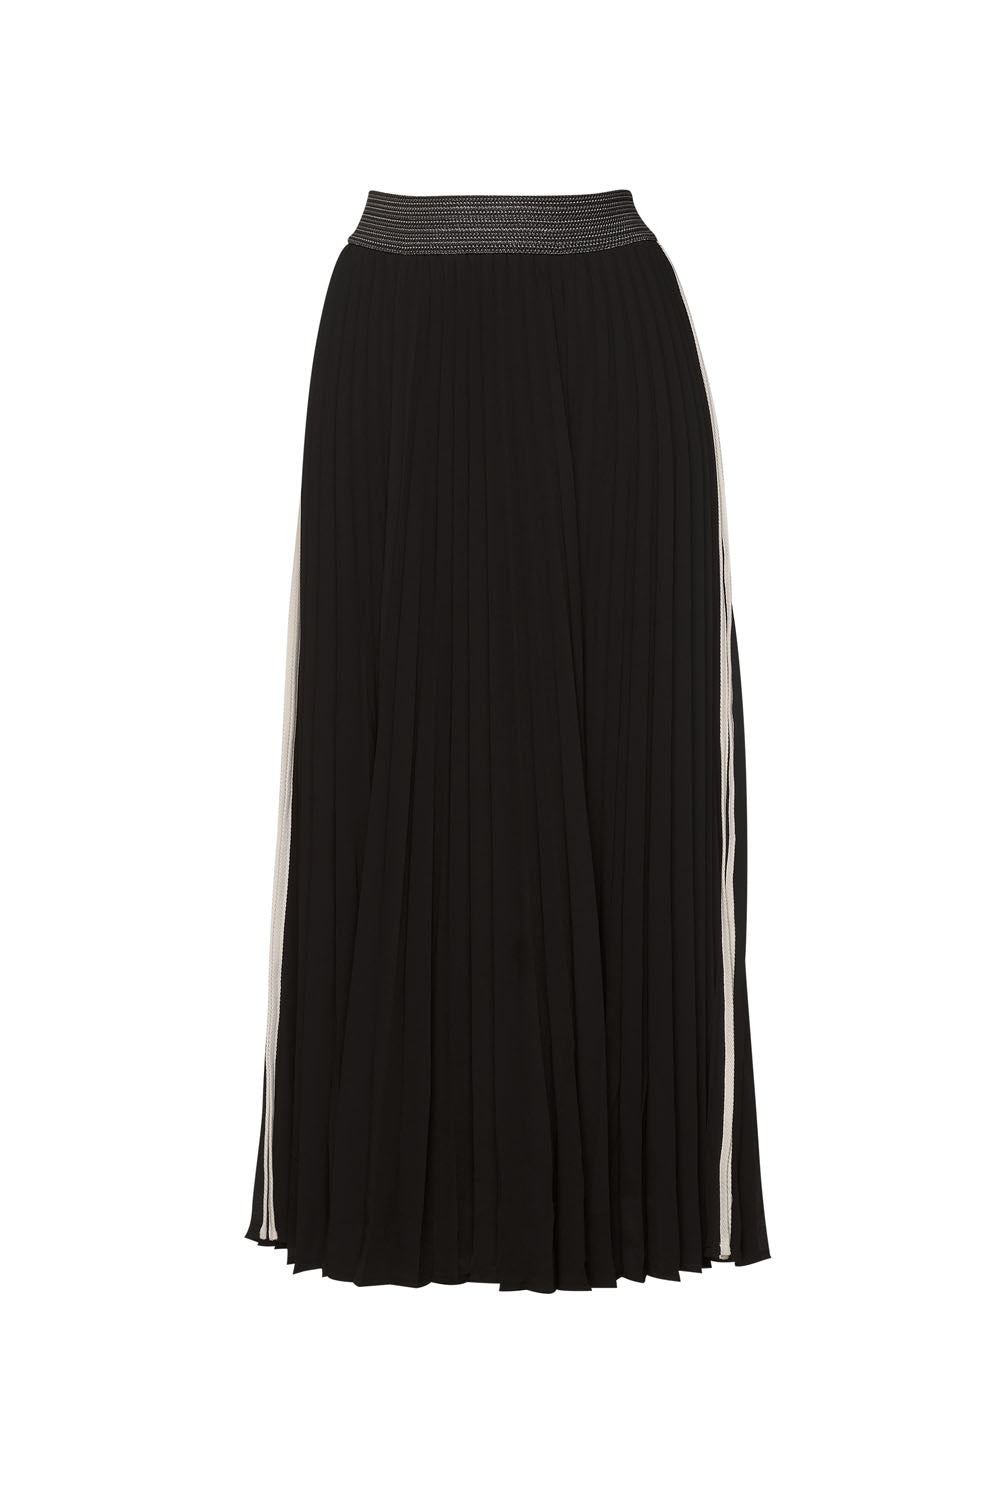 Madly Sweetly - Just Pleat It Skirt (Black)